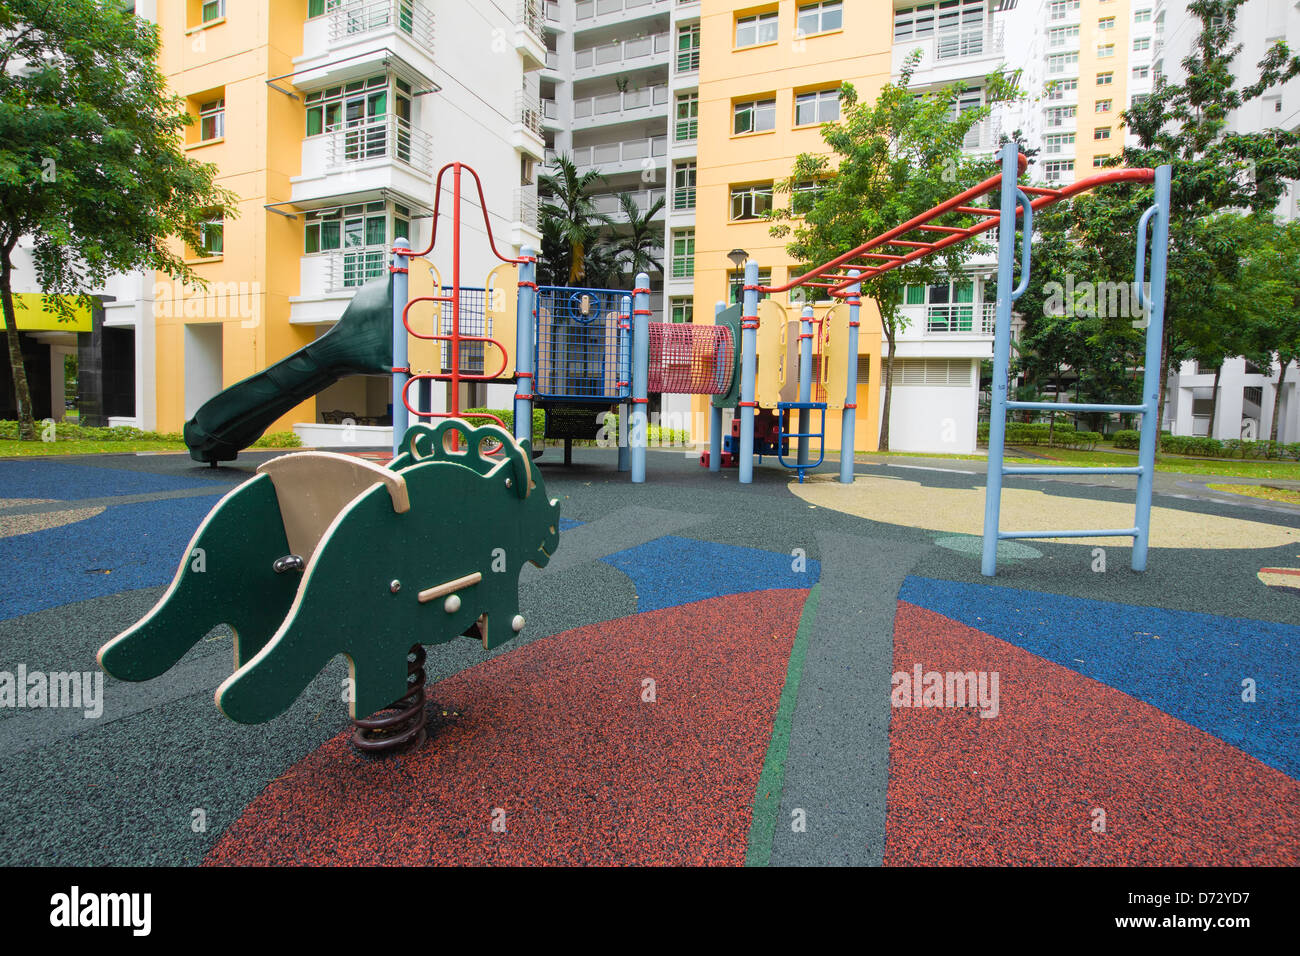 Singapore Public Housing Apartments Childrens Playground in Punggol District Stock Photo